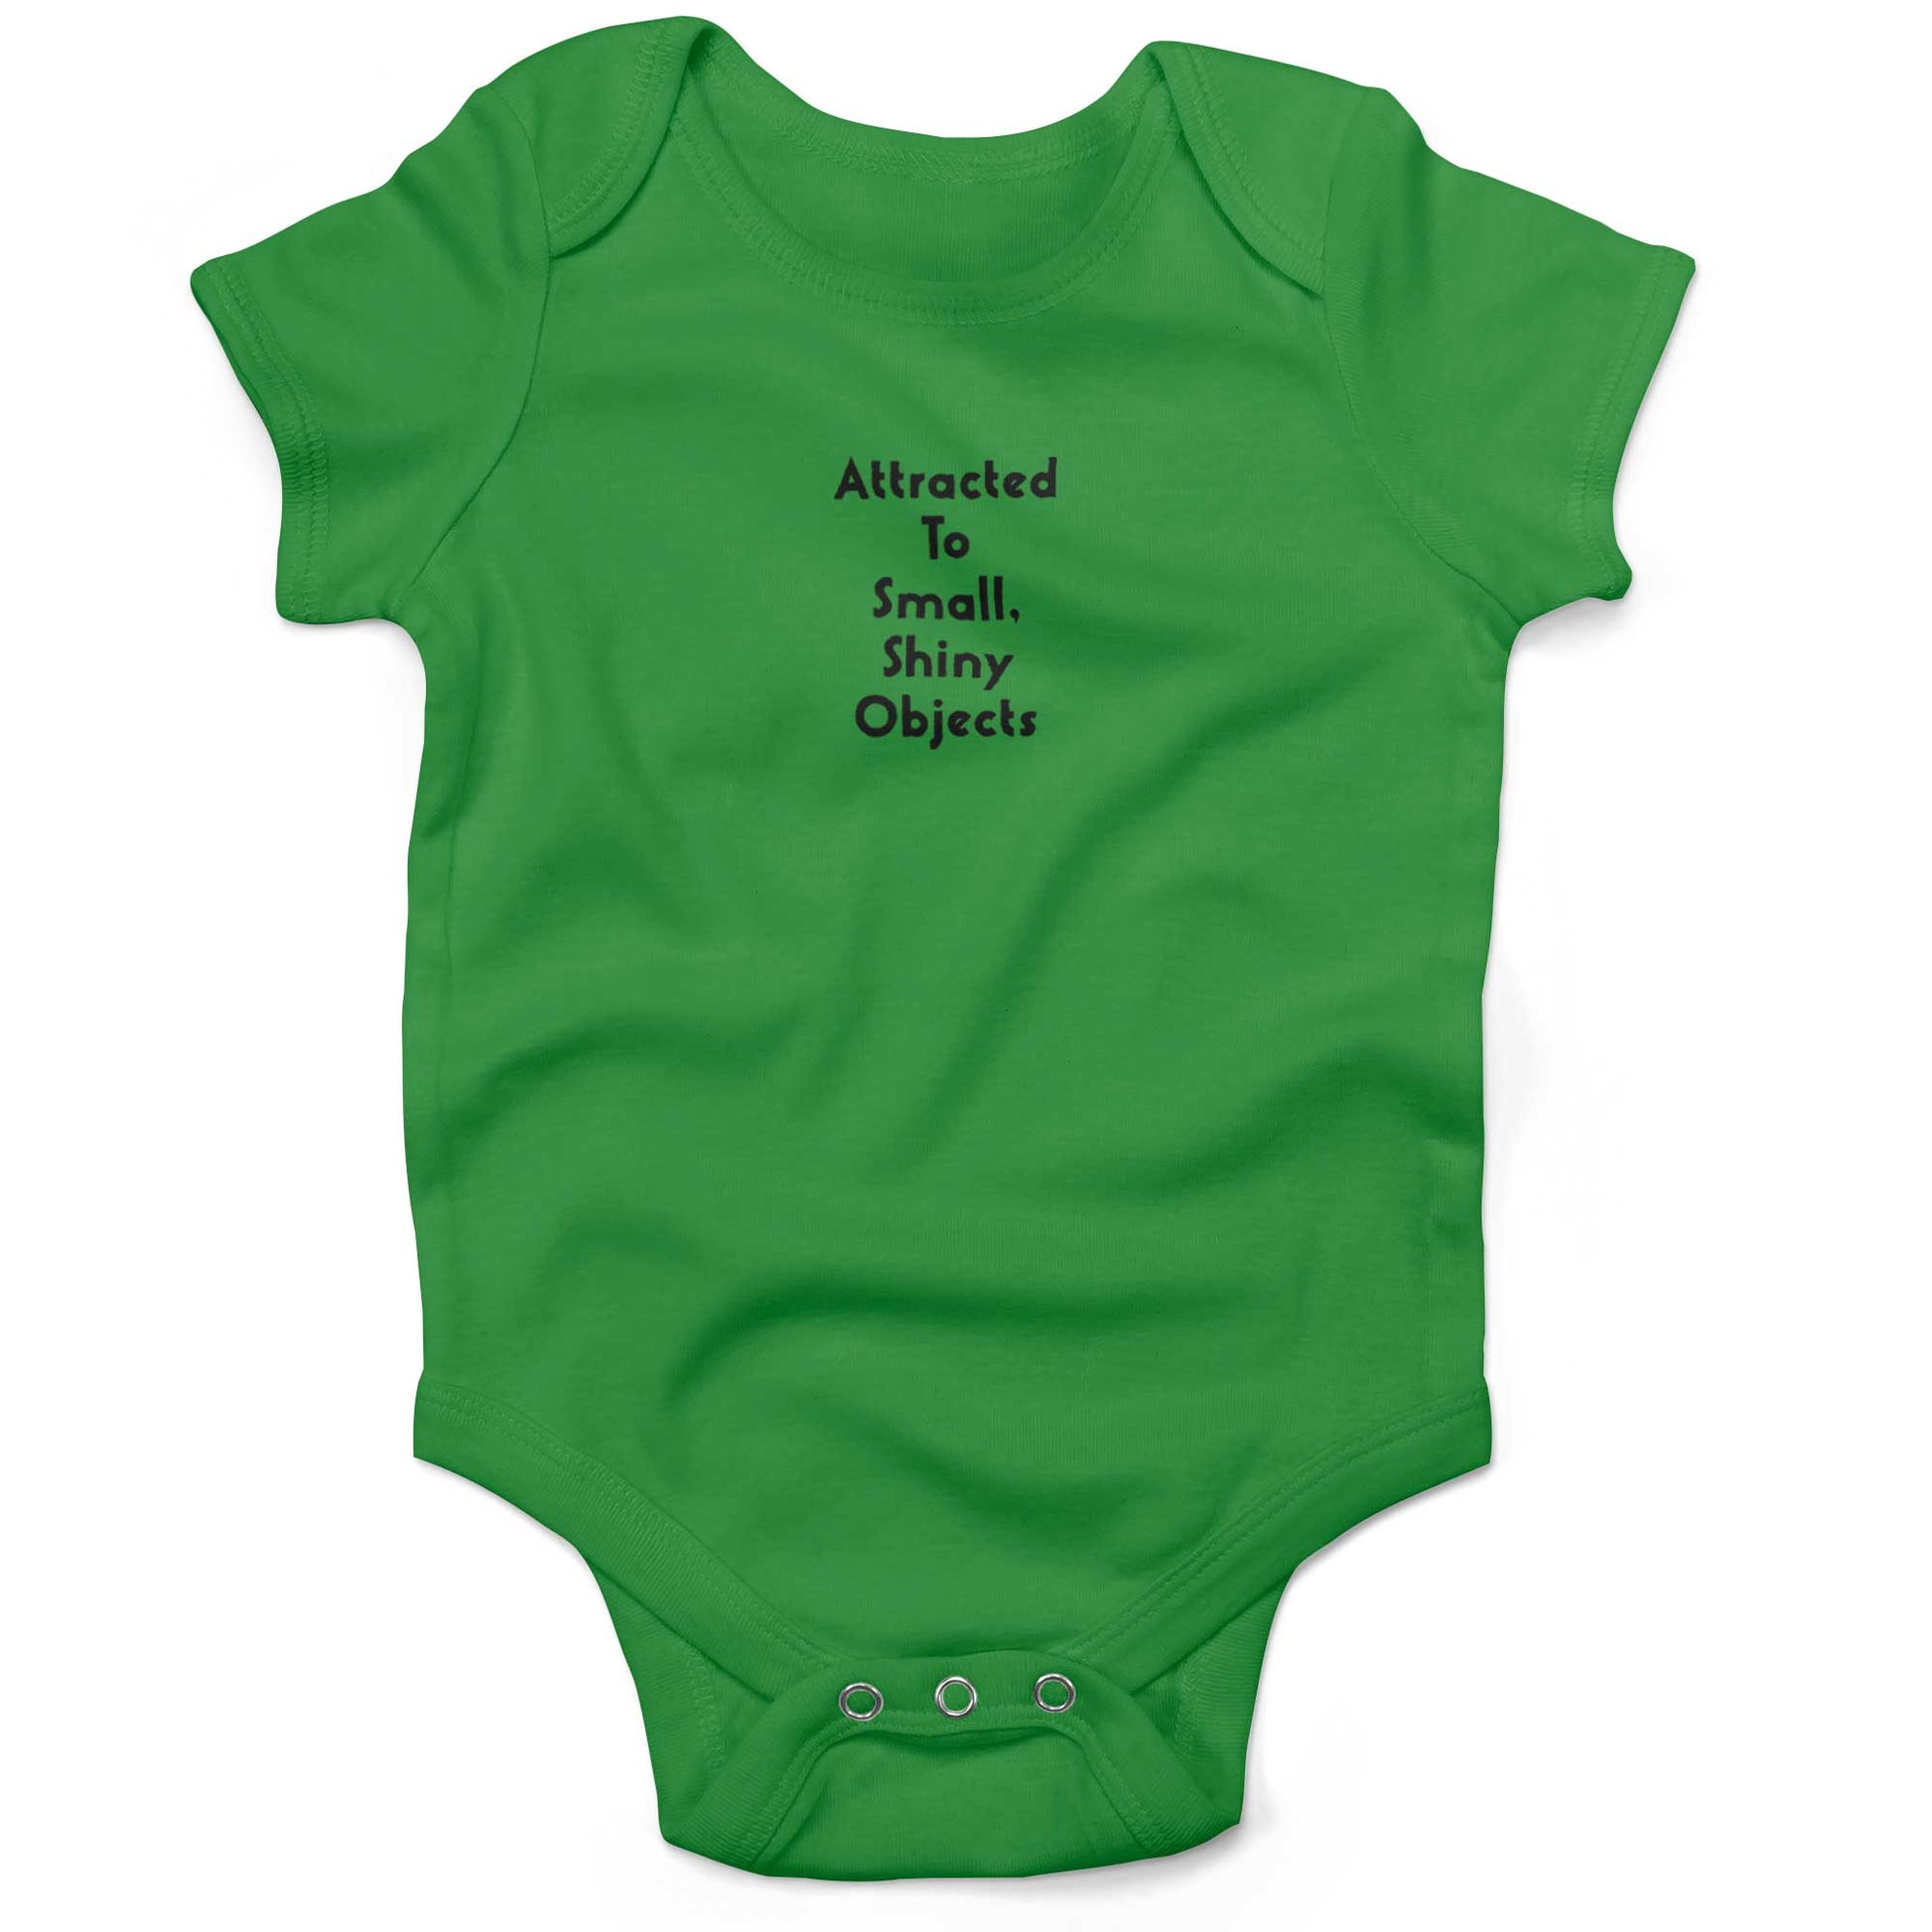 Attracted To Small, Shiny Objects Baby One Piece-Grass Green-3-6 months